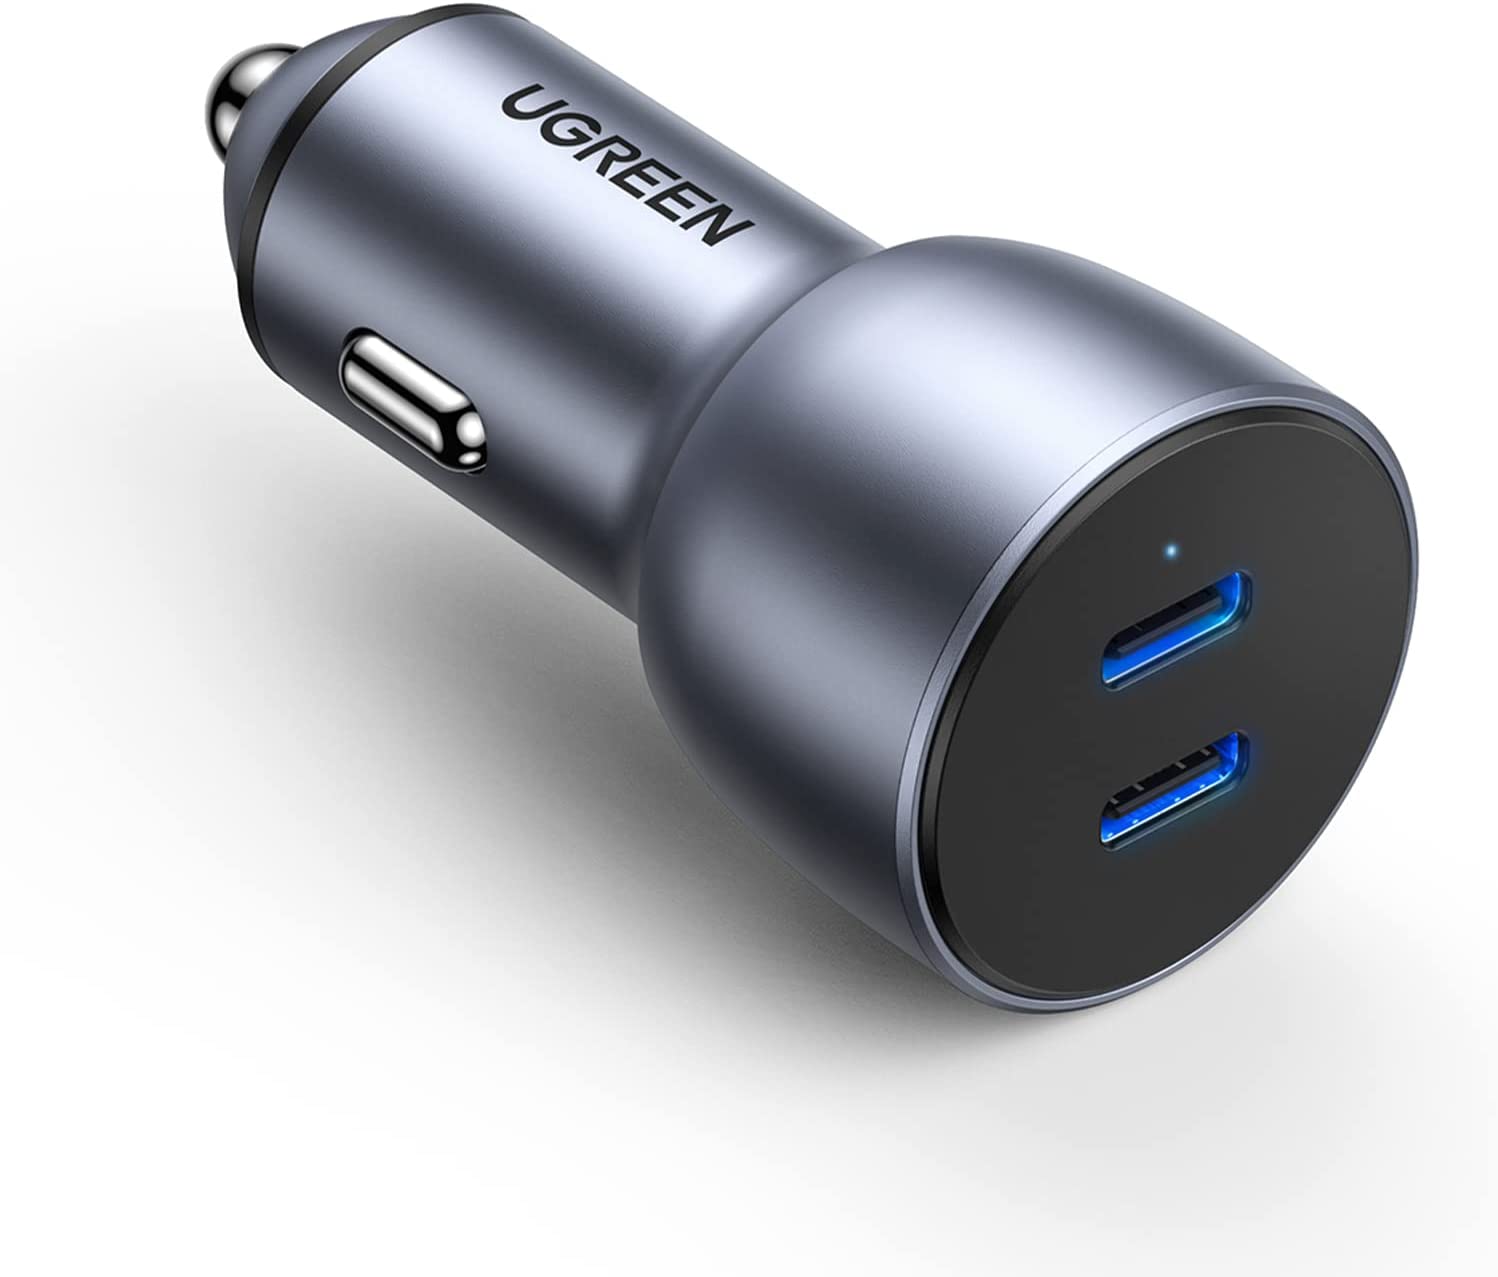 Chargeur UGREEN Fast Charge - charge 2 appareils USB-C en même temps